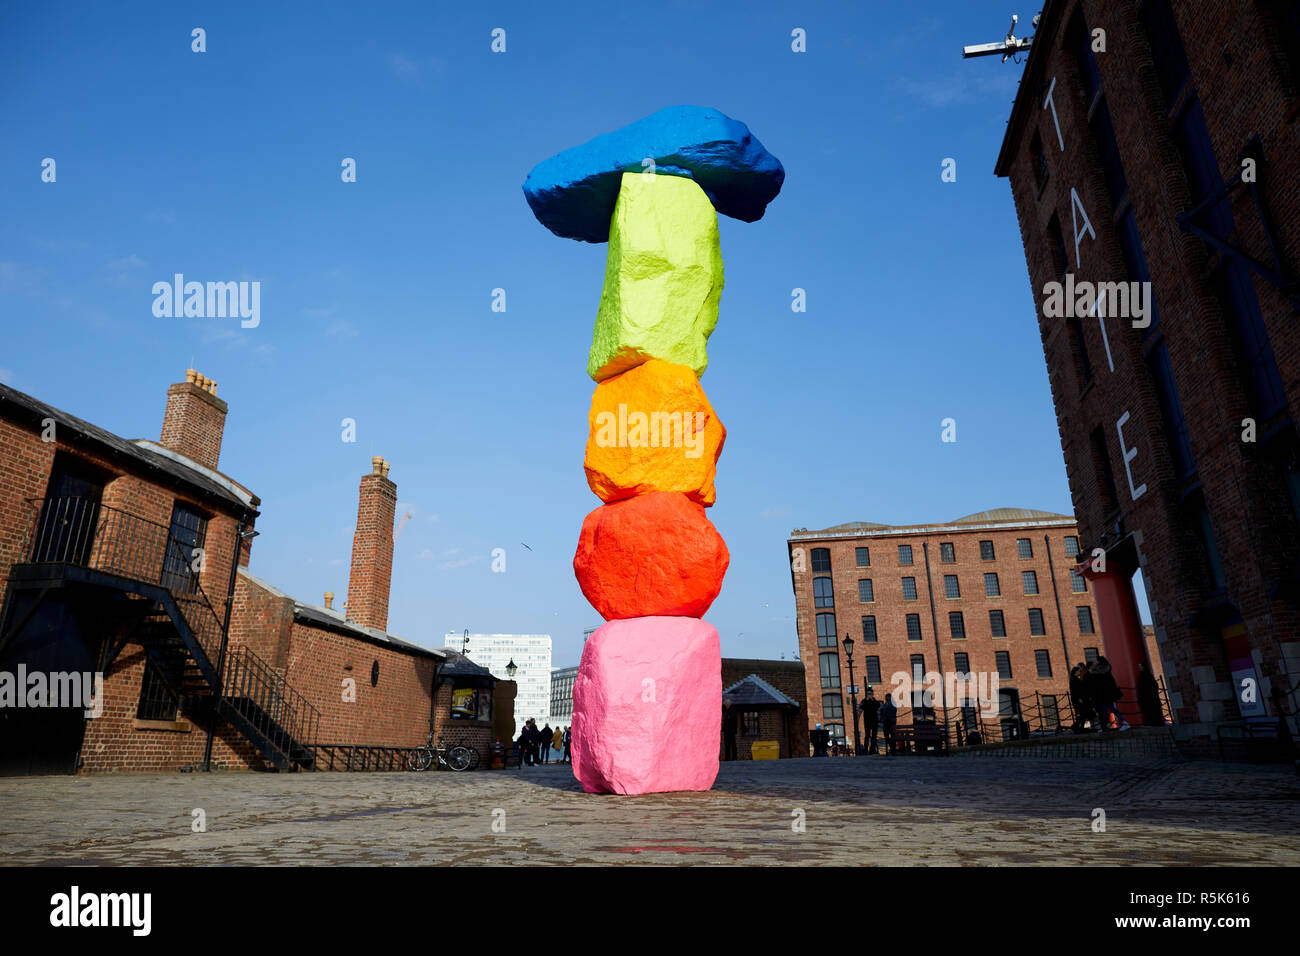 Liverpool Mountain public art on Liverpools waterfront by artist Ugo Rondinone Stock Photo